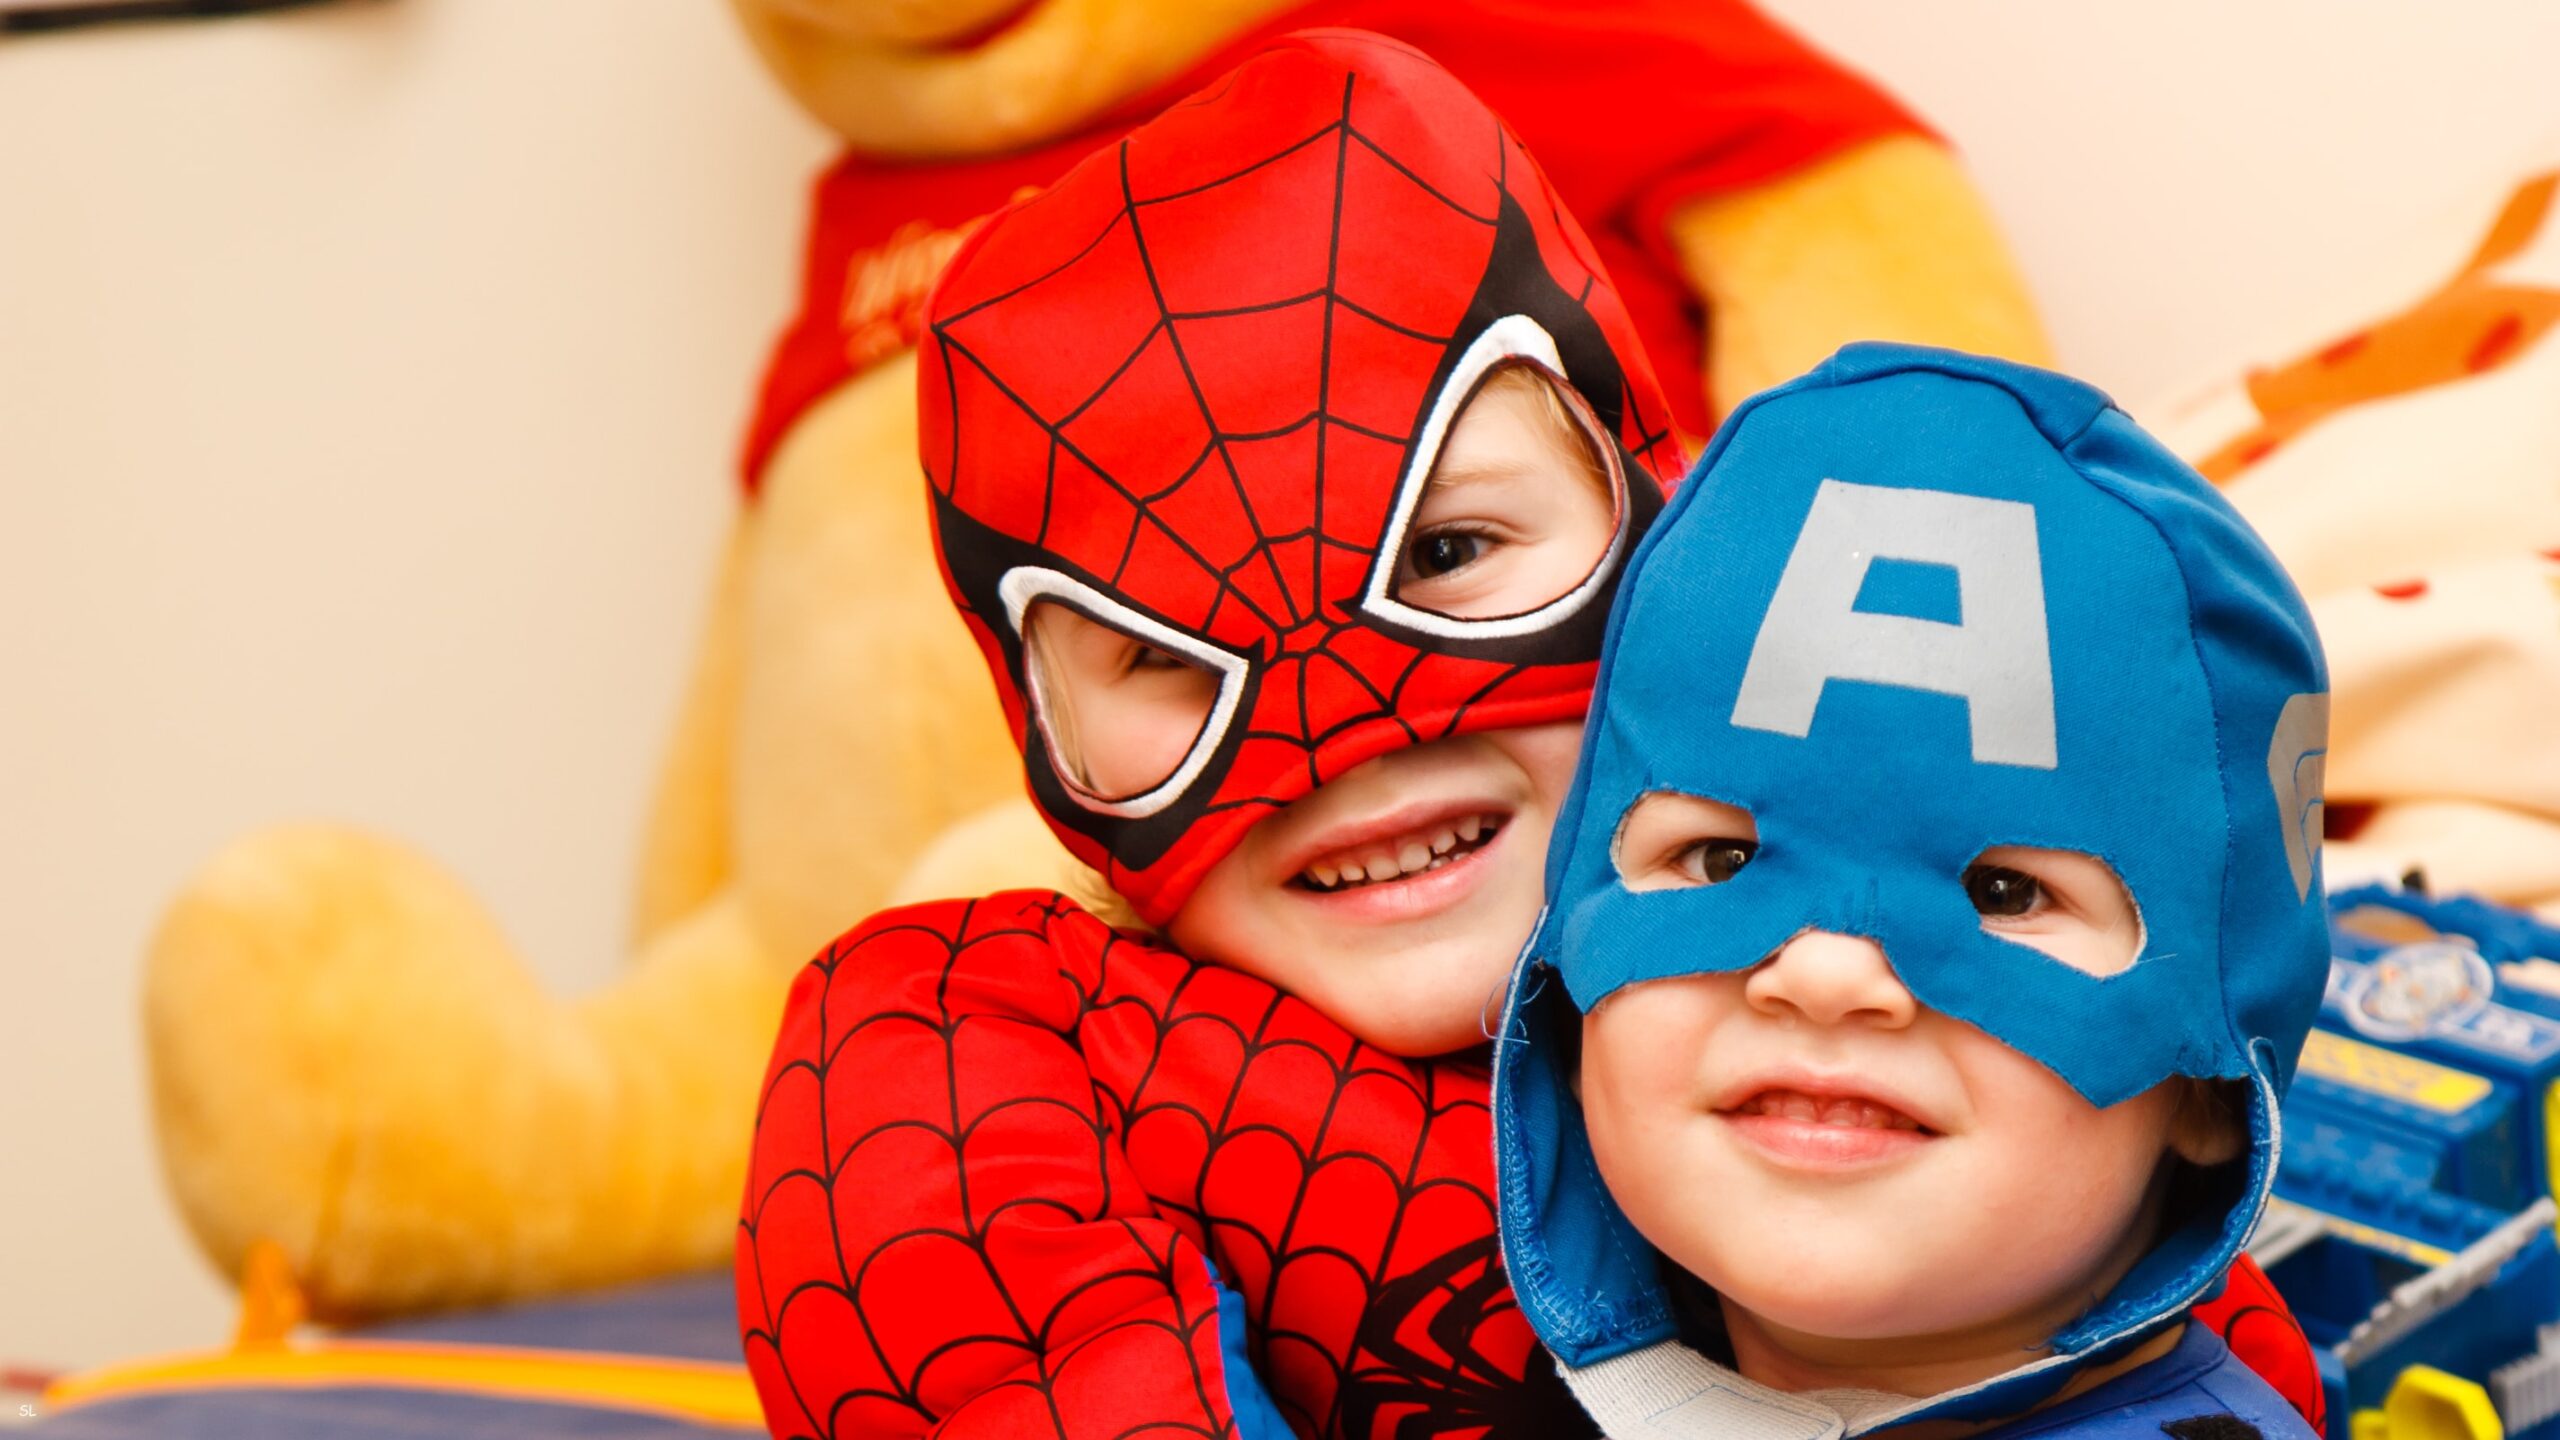 A child dressed as Spider-Man and a child dressed as Captain America